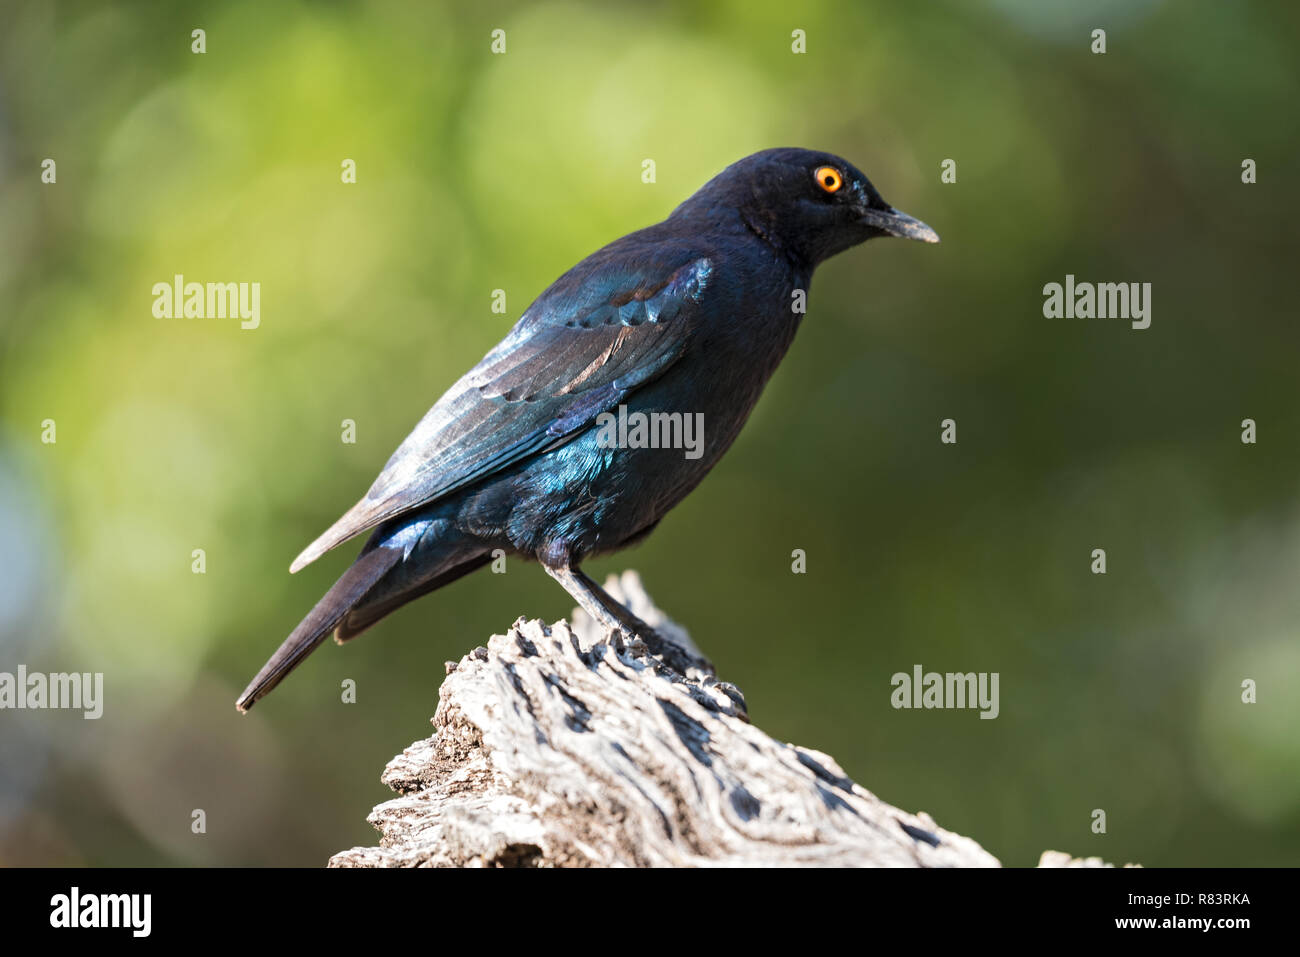 Cape glossy starling (Lamprotornis nitens) on a branch in Namibia Stock Photo